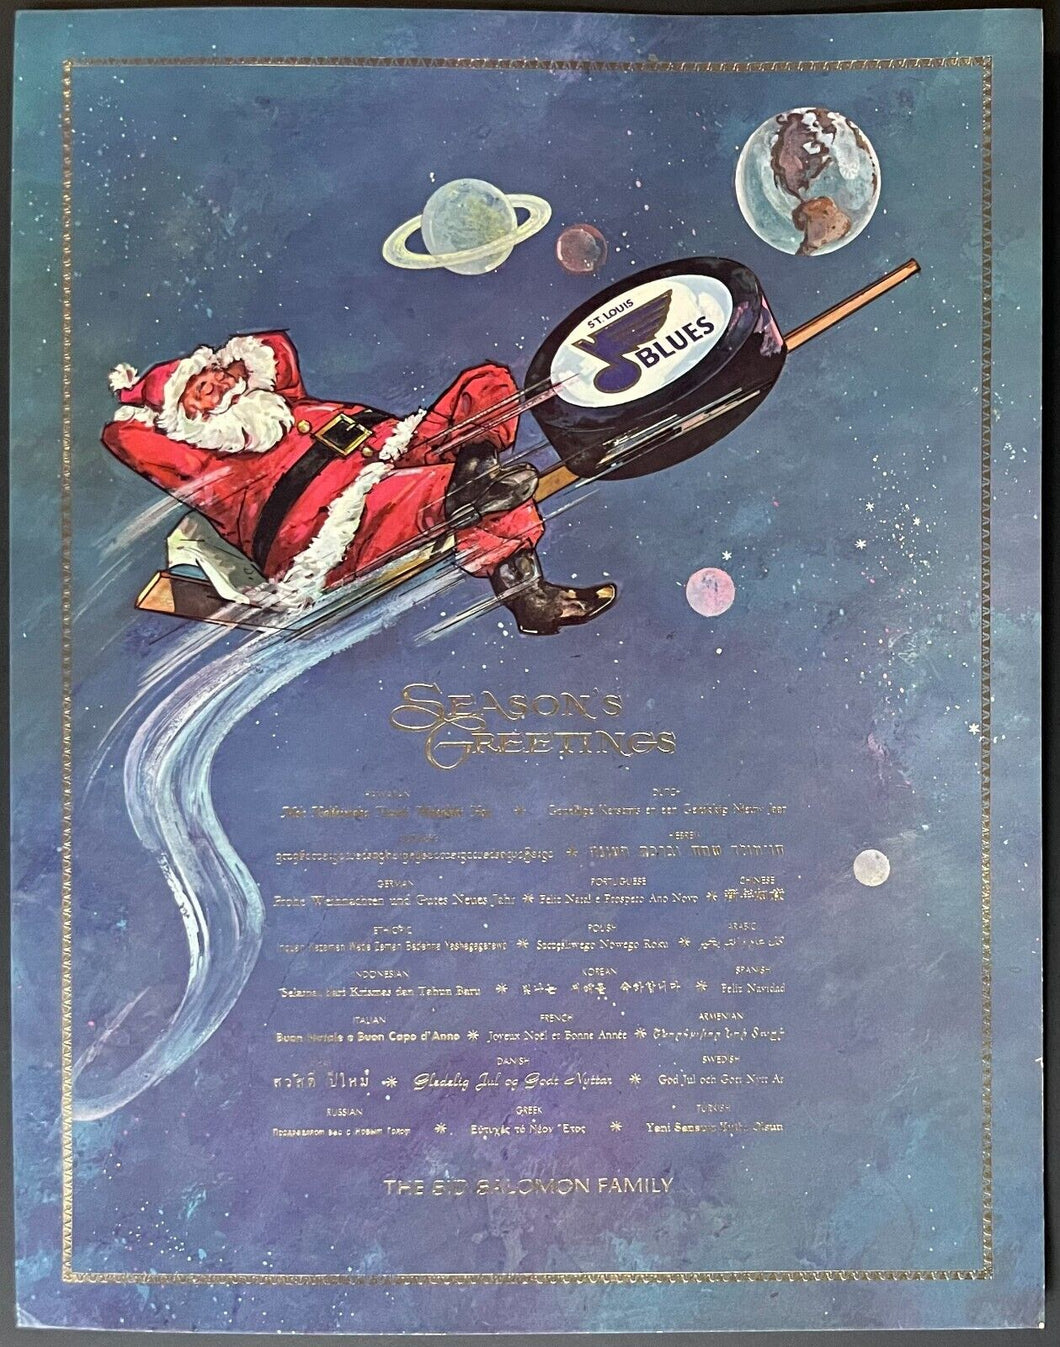 1969 St.Louis Blues Oversized Outer Space Christmas Card + Moon Landing Photo